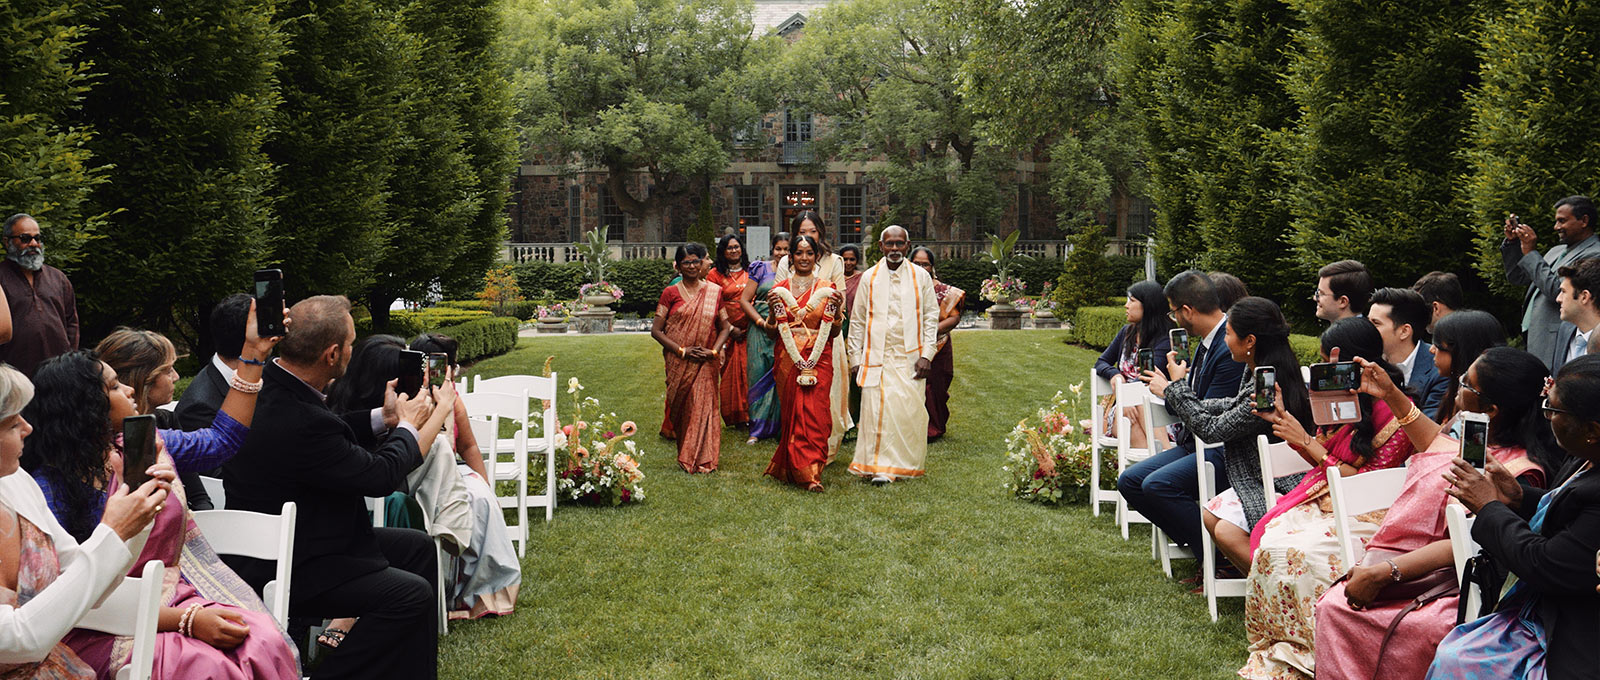 Hindu bride walks down the aisle with her family during a garden wedding ceremony at Graydon Hall Manor.